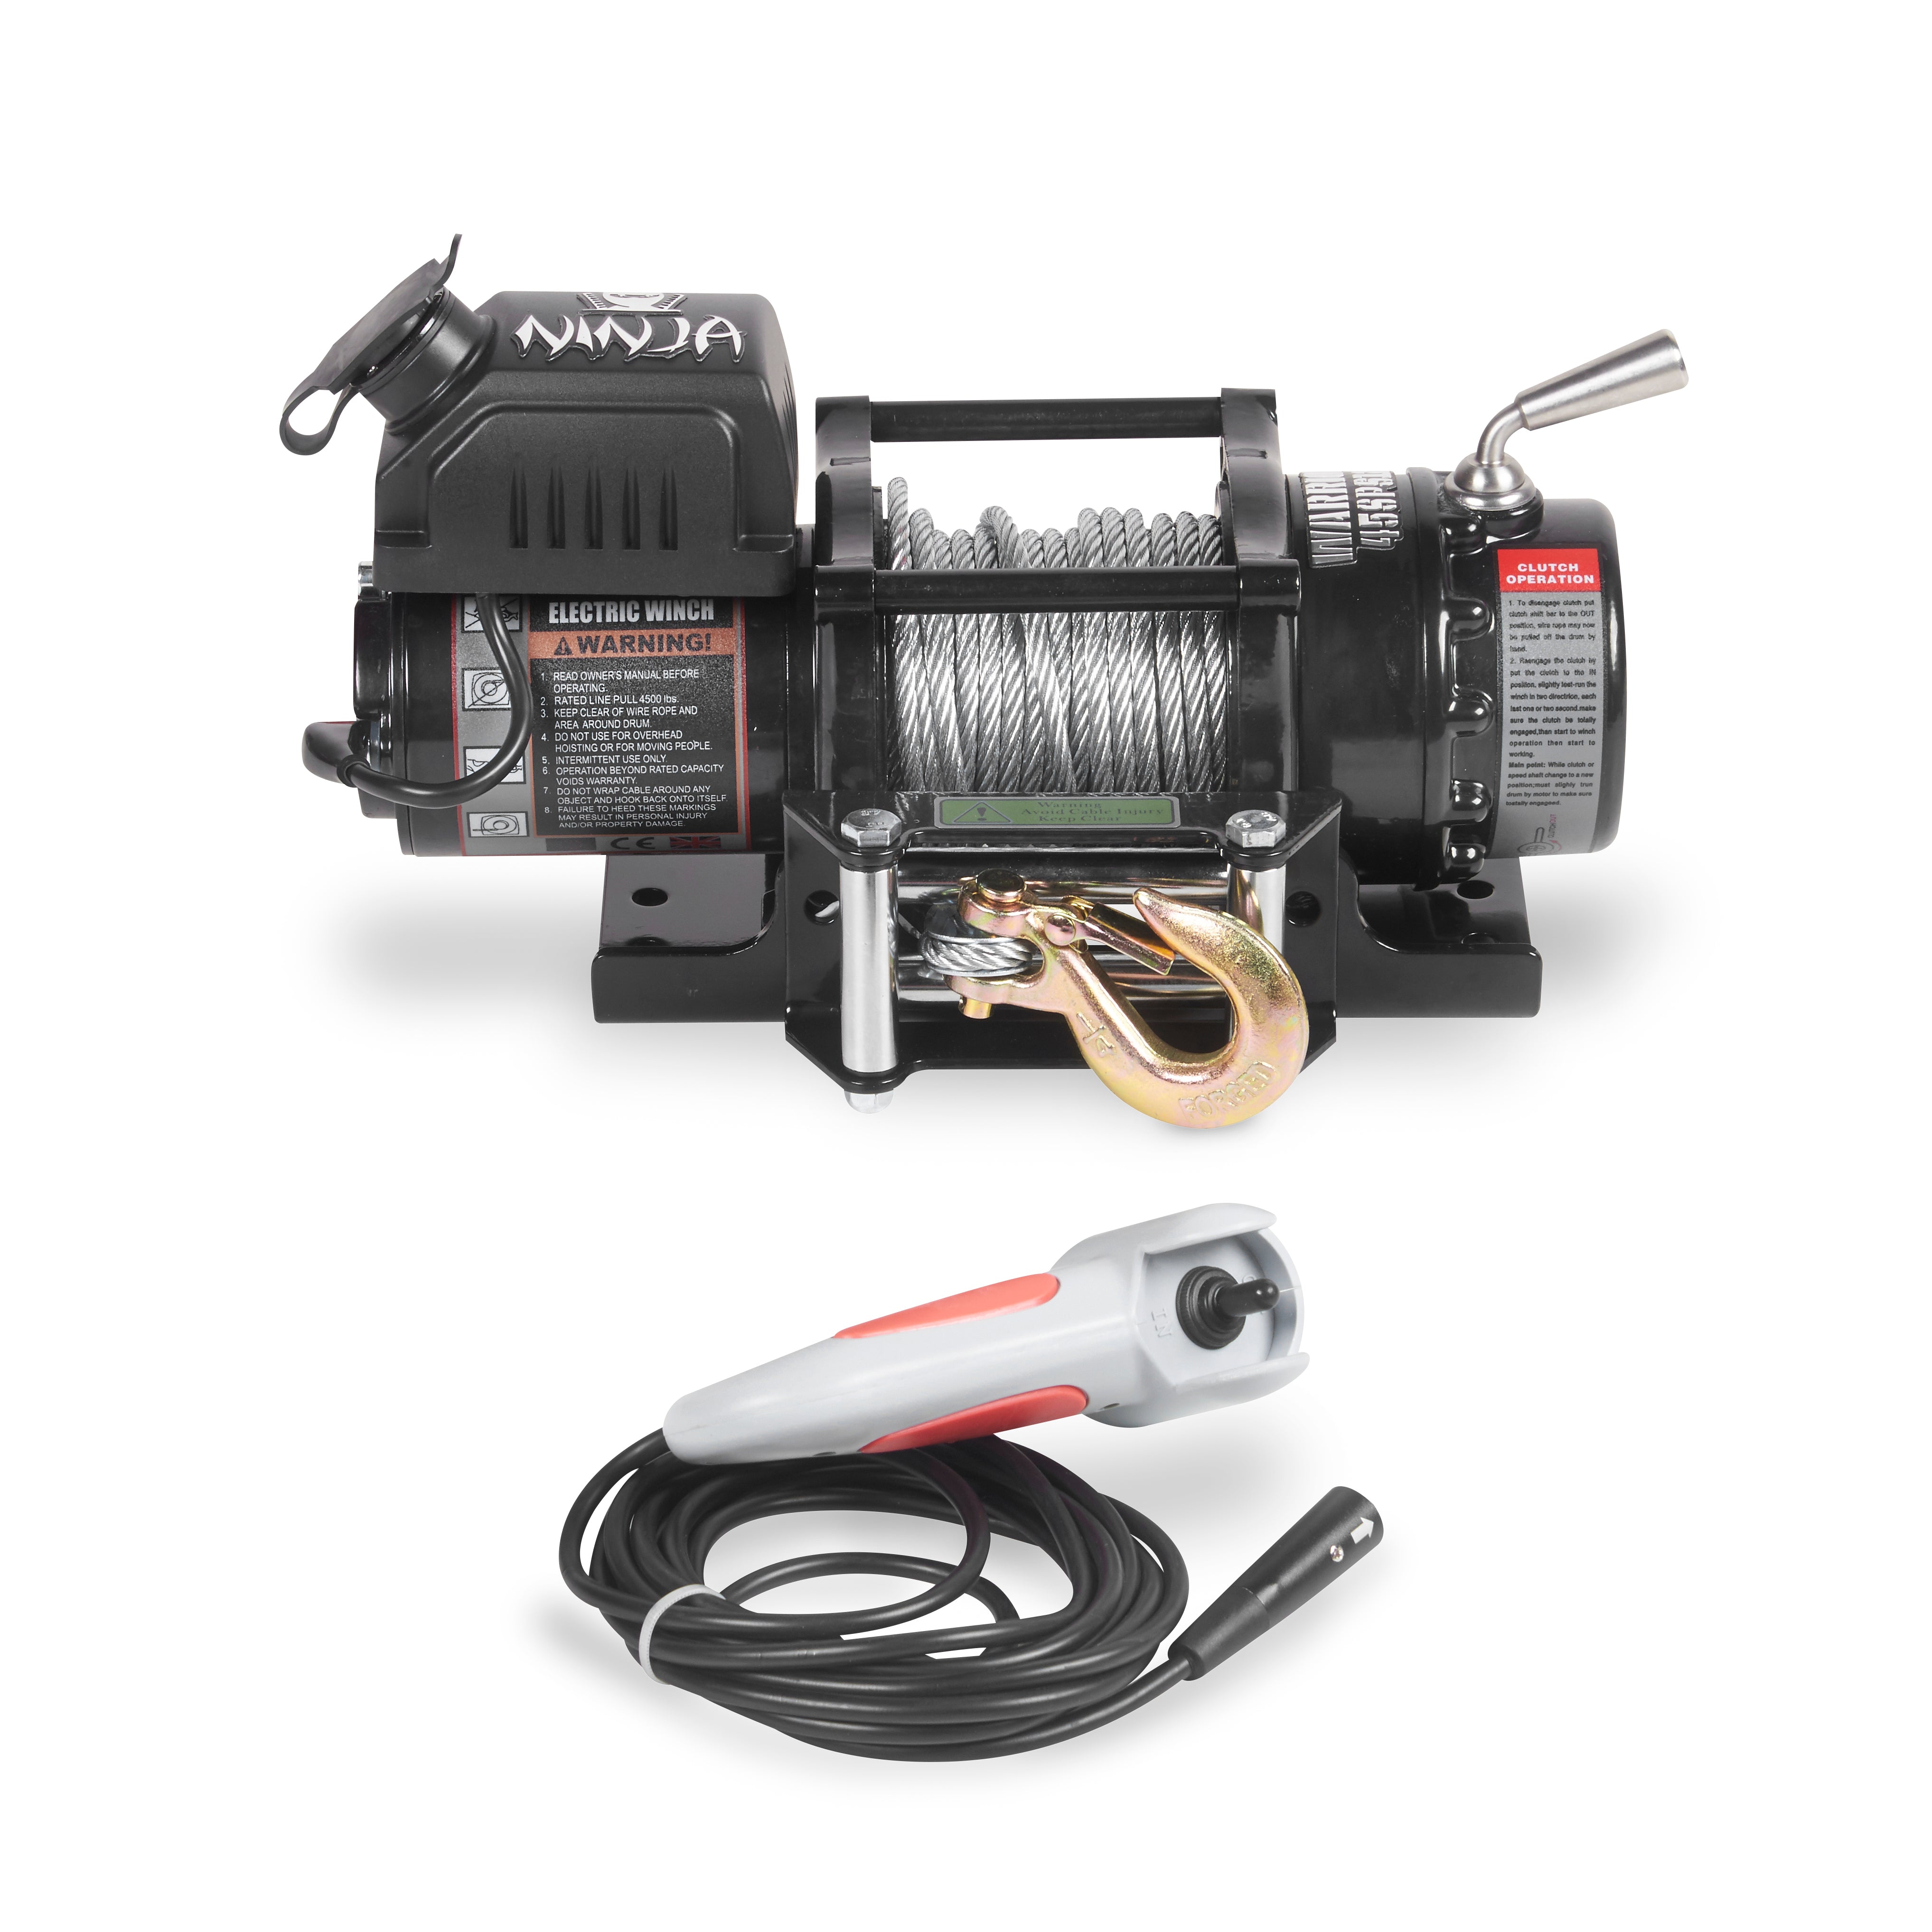 The WARN Drill Winch: Versatile, Portable, and Powered by Your Electric  Drill